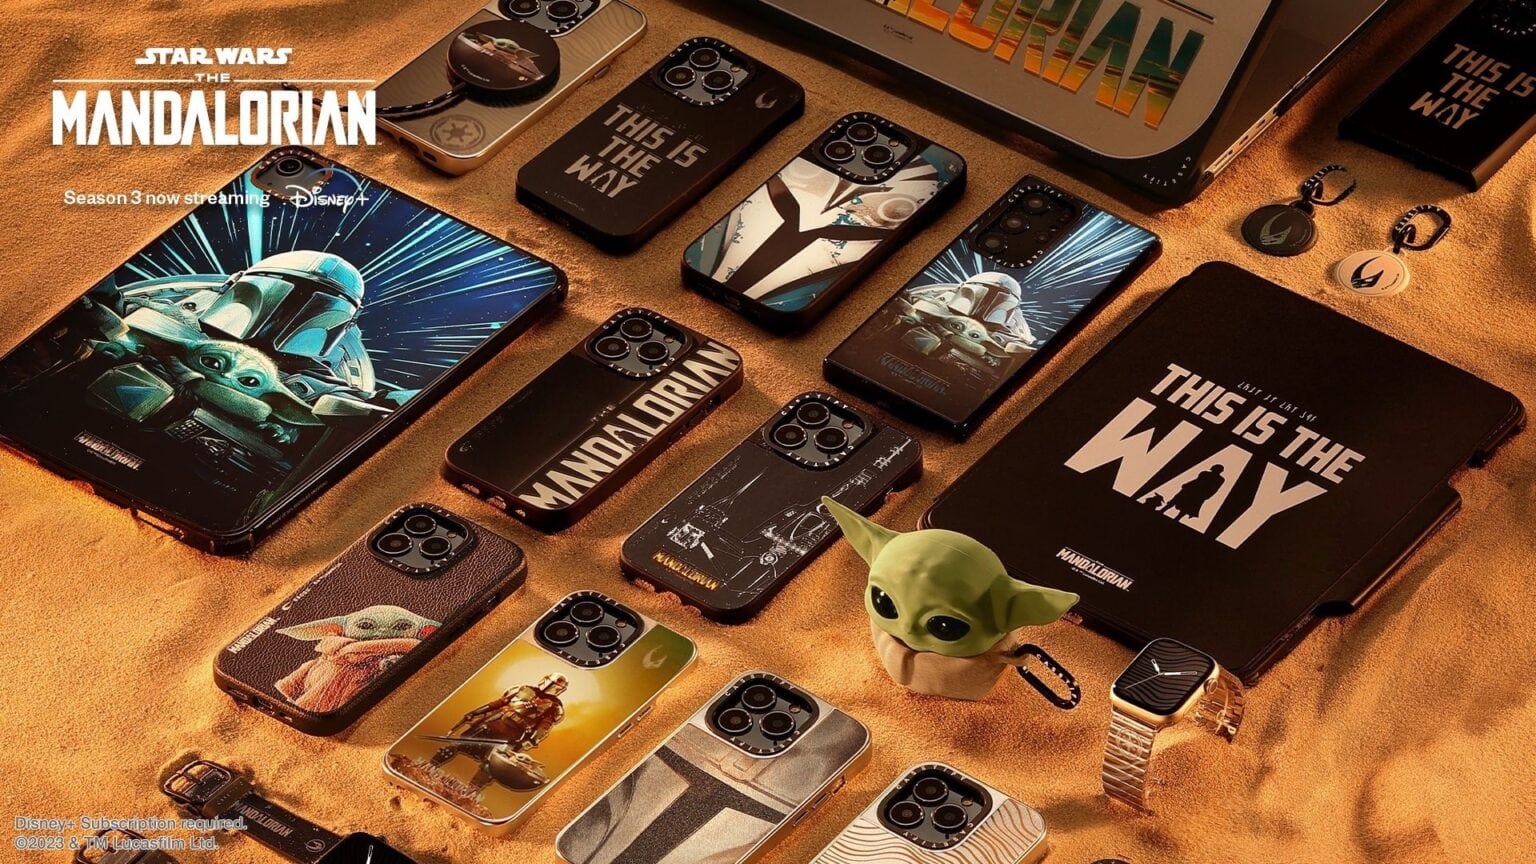 Armor up all your Apple gear with new 'Mandalorian' cases